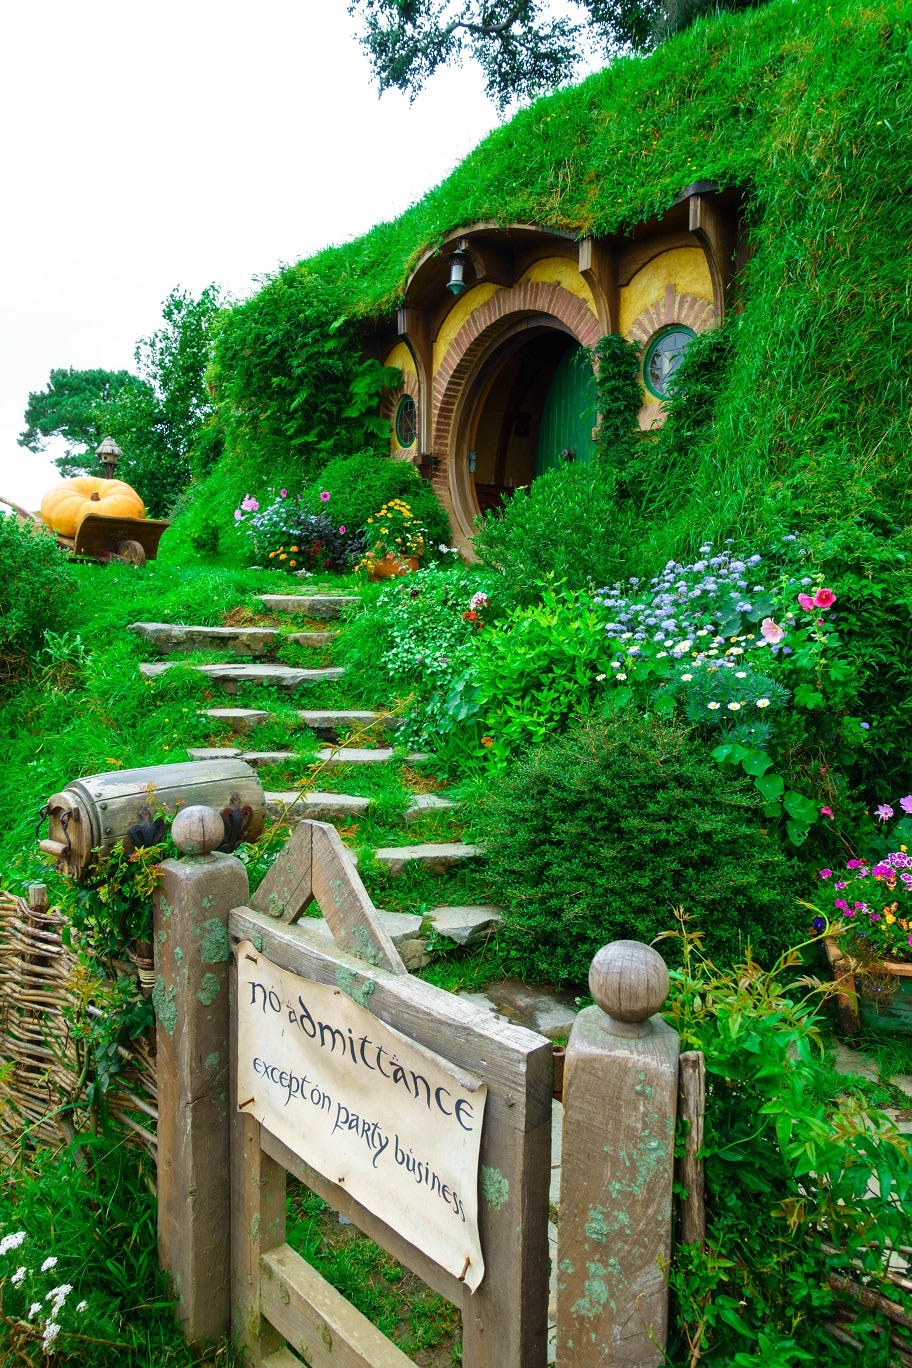 Photo of a Hobbit home 